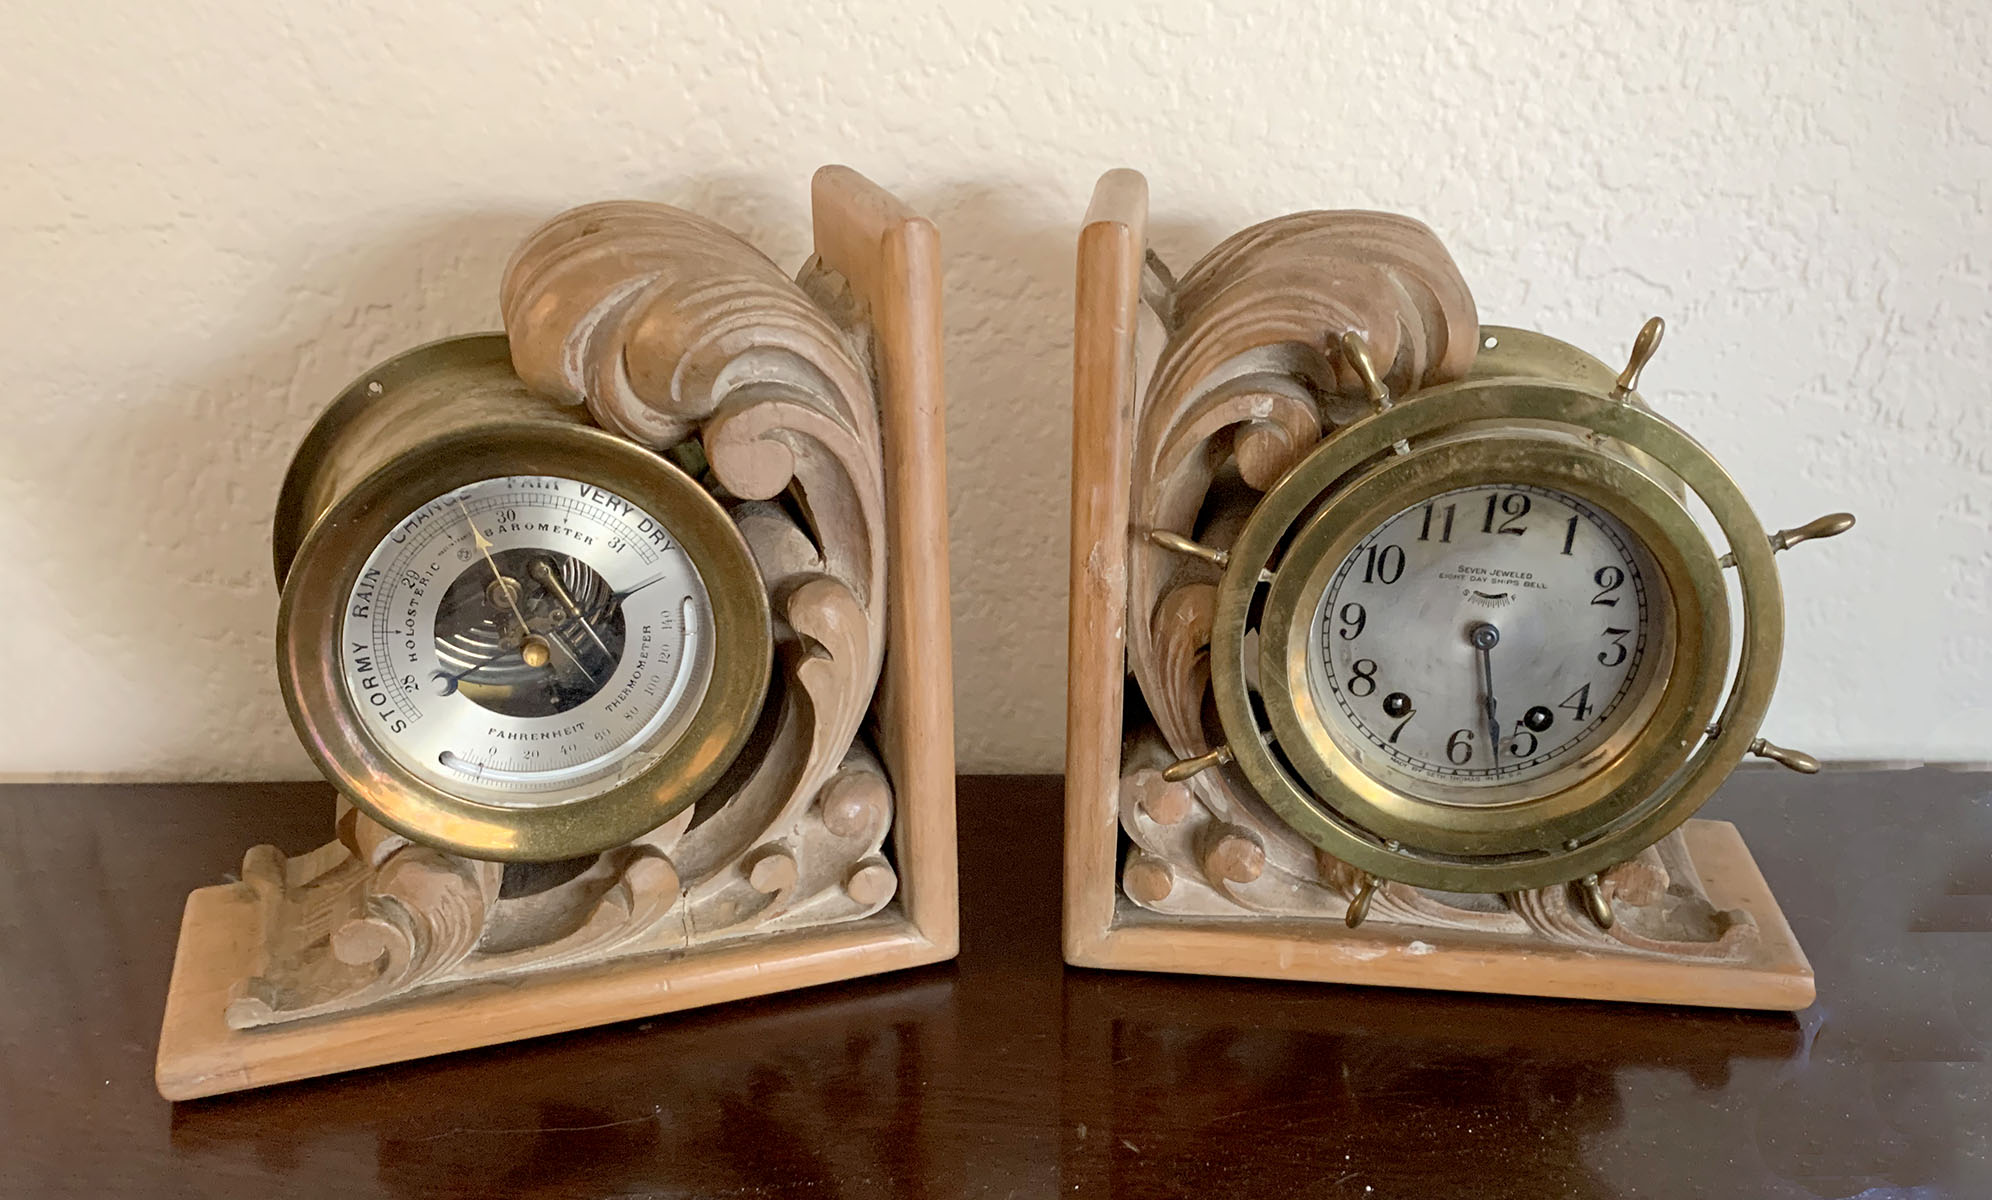 SHIP'S CLOCK AND BAROMETER BOOKENDS: